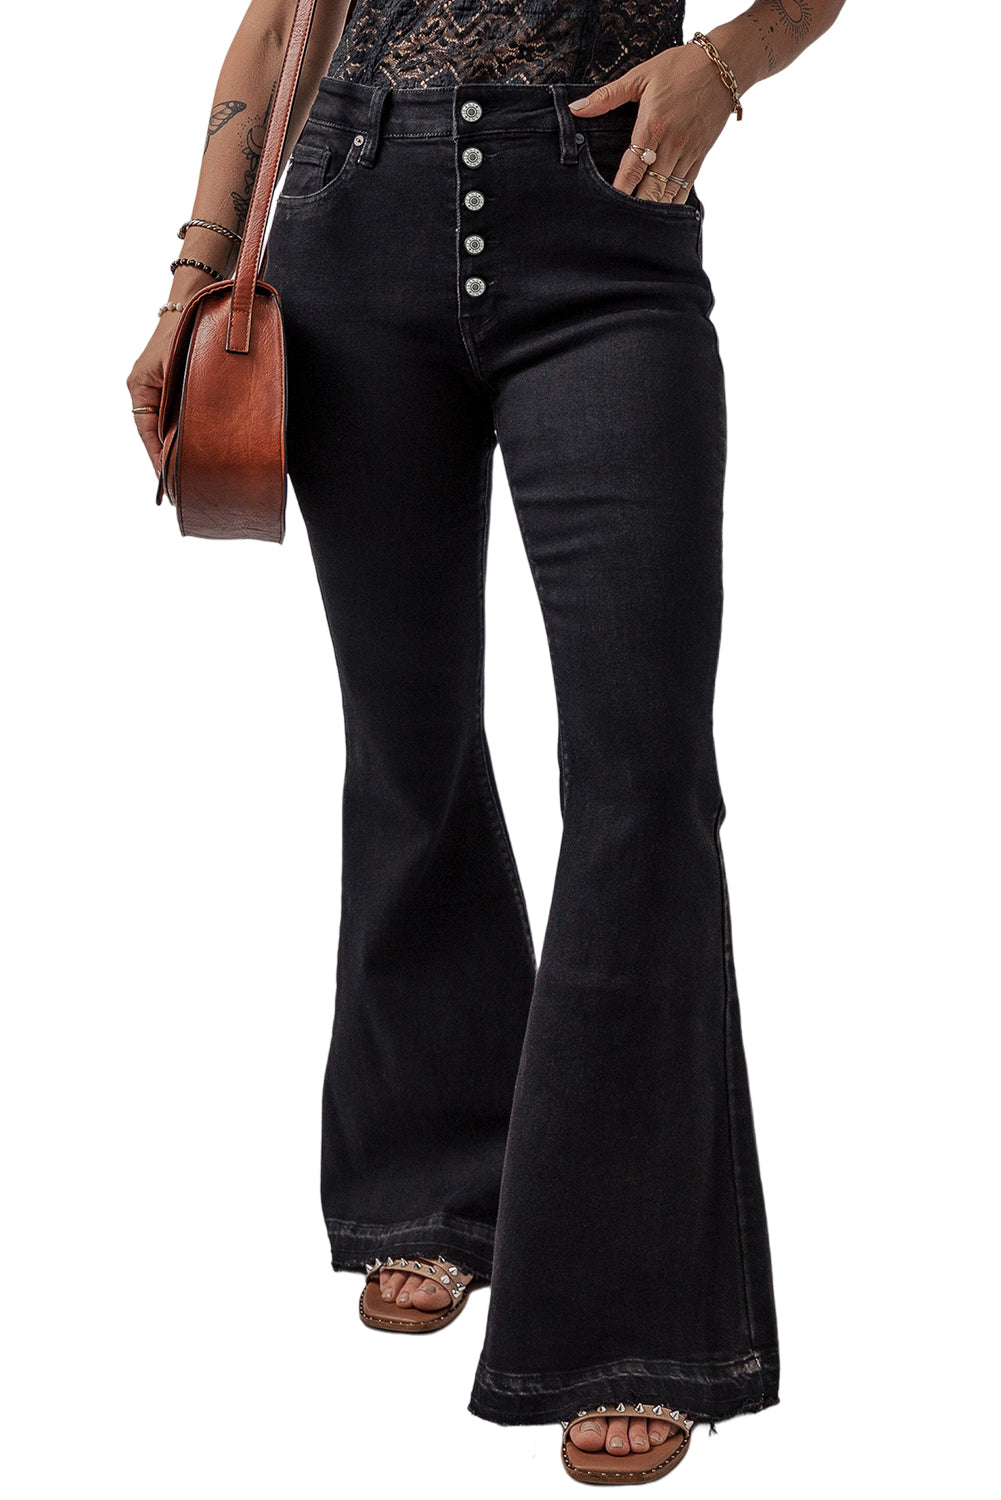 - Women's High Waist Button Front Black Flare Jeans - womens jeans at TFC&H Co.